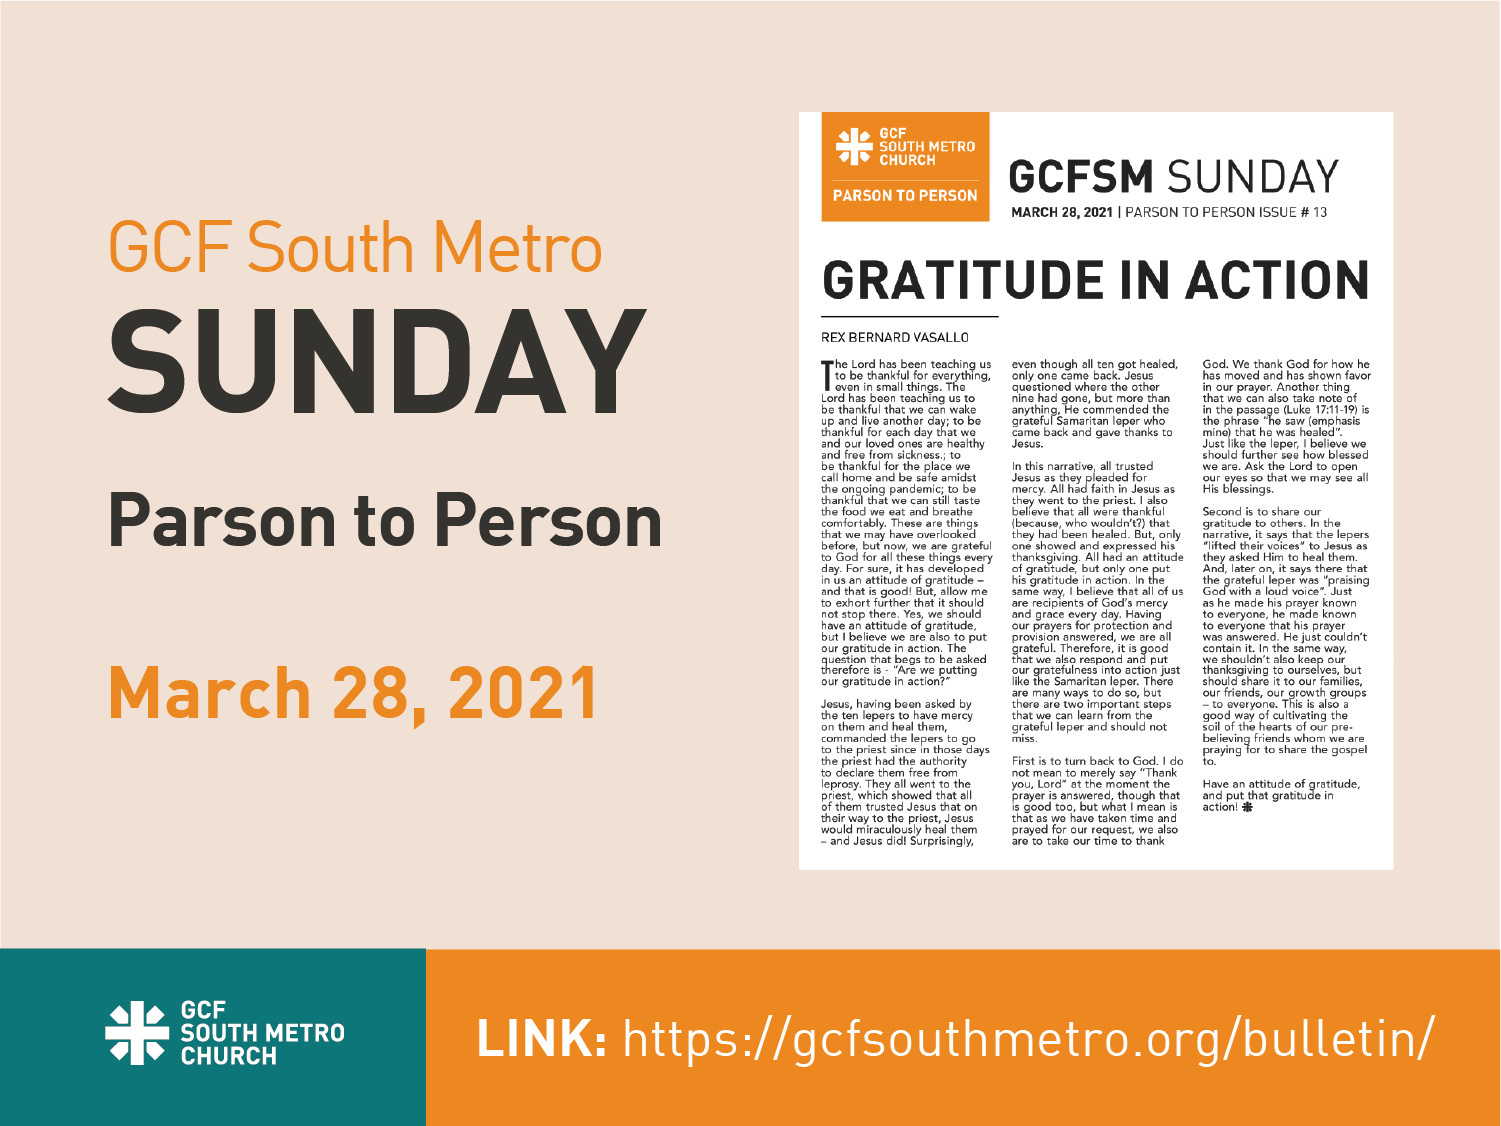 Sunday Bulletin – Parson to Person, March 28, 2021